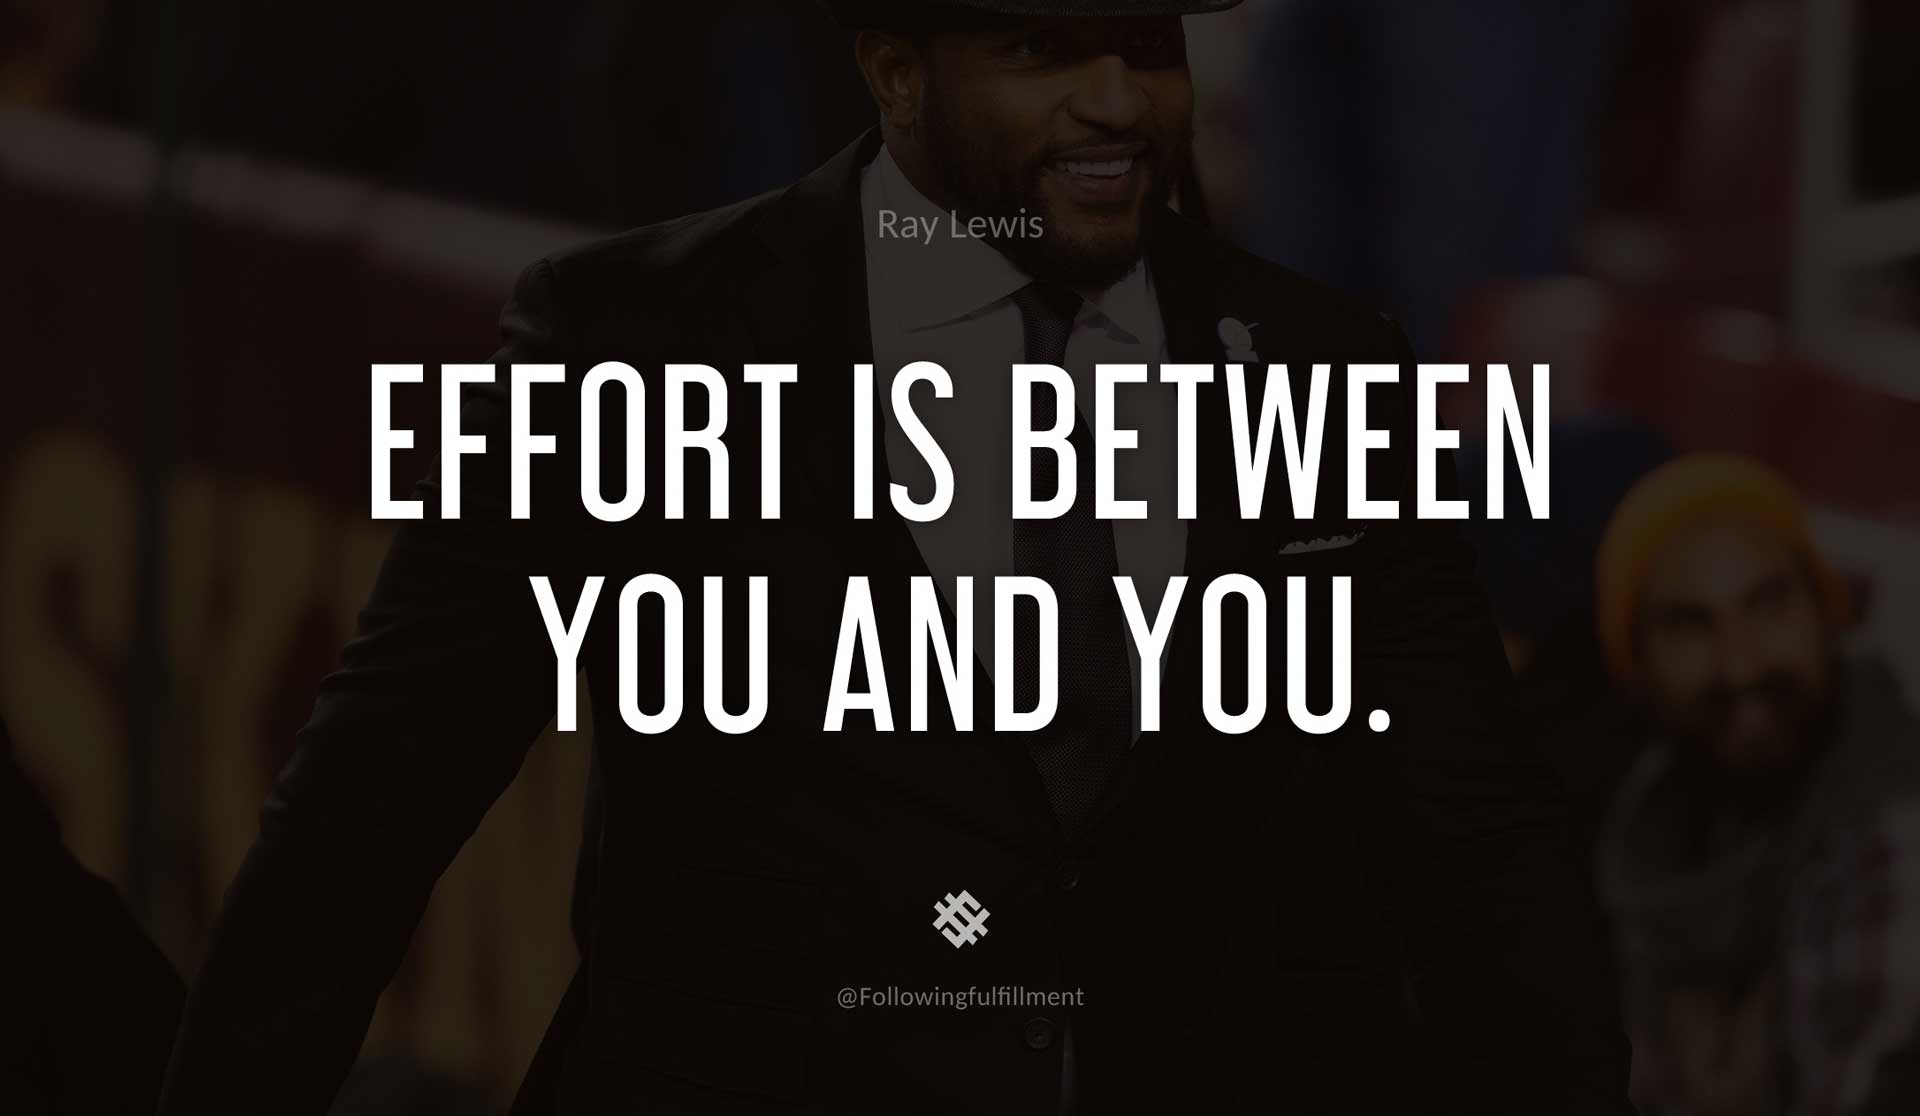 Effort-is-between-you-and-you.-RAY-LEWIS-Quote.jpg